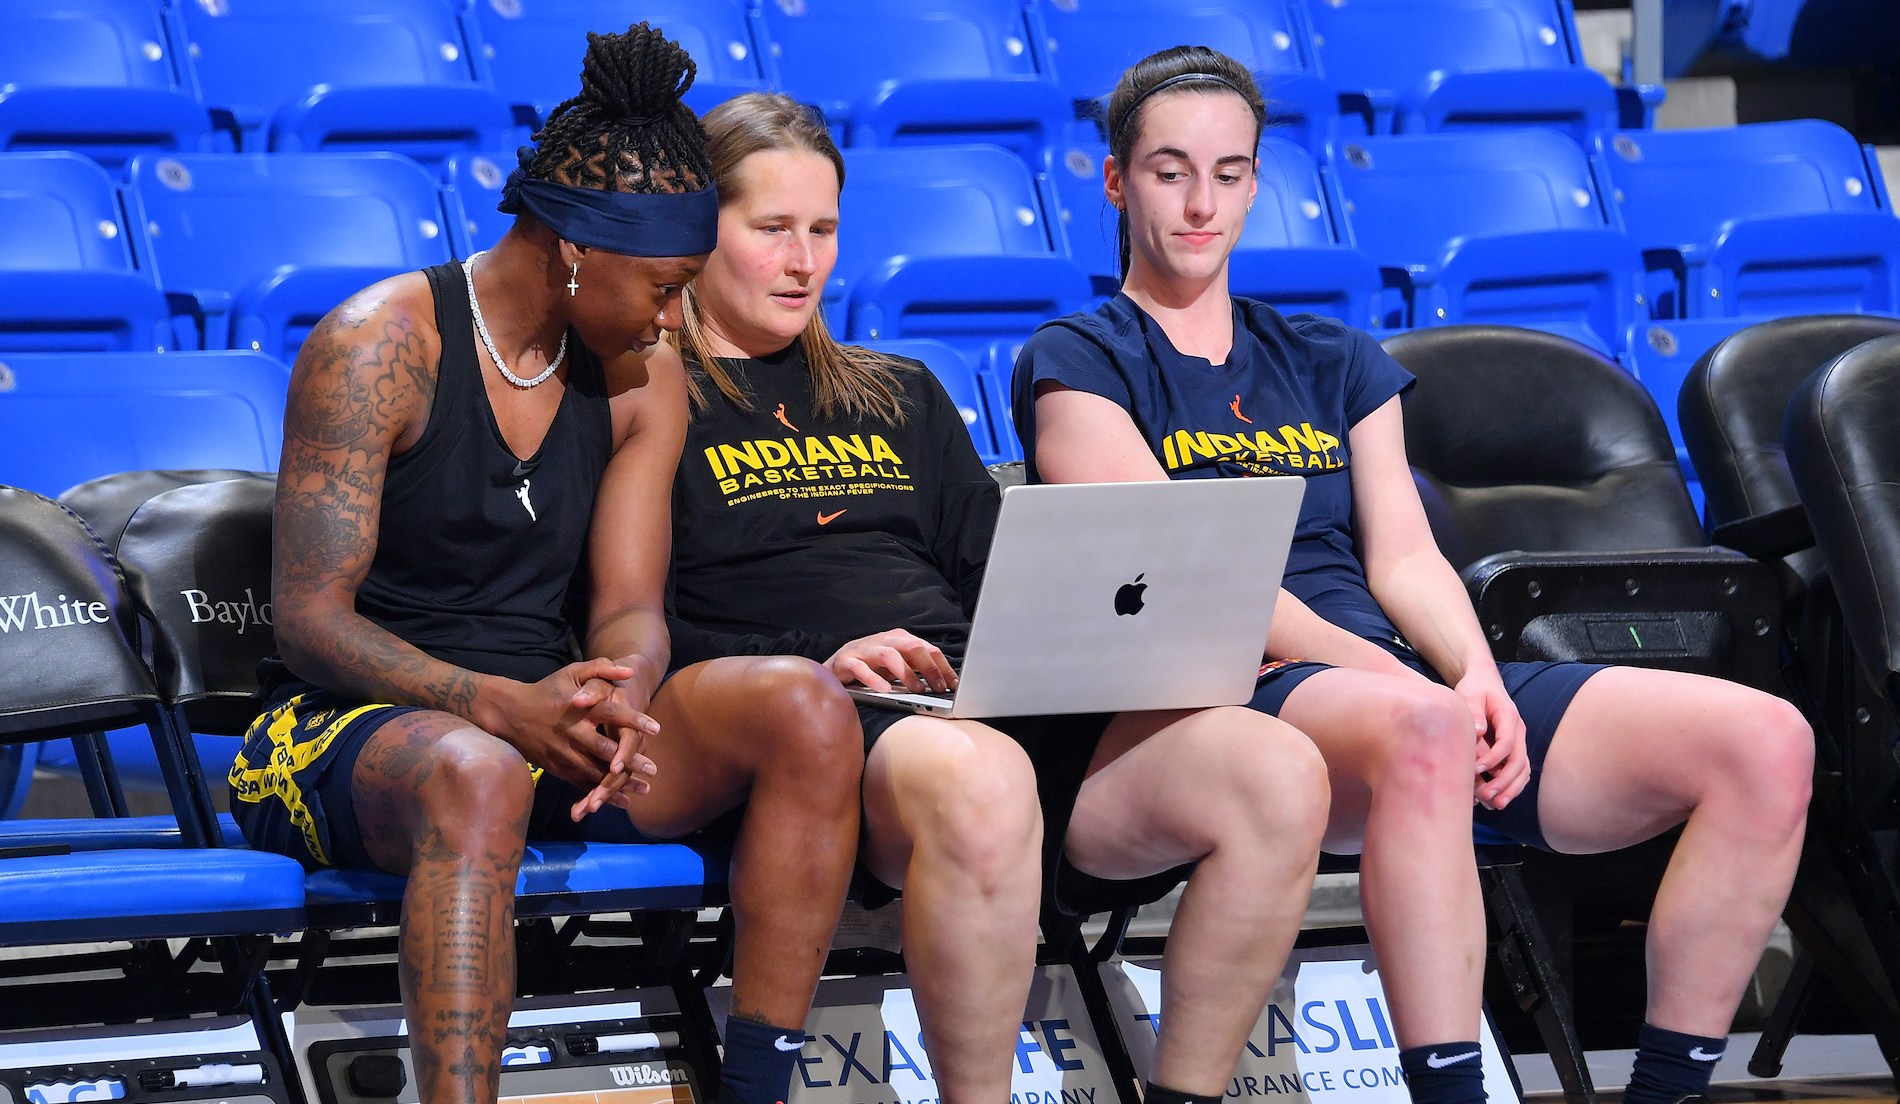 Caitlin Clark #22, Erica Wheeler #17, and Assistant Coach Jessie Miller of the Indiana Fever look on before the game against the Dallas Wings